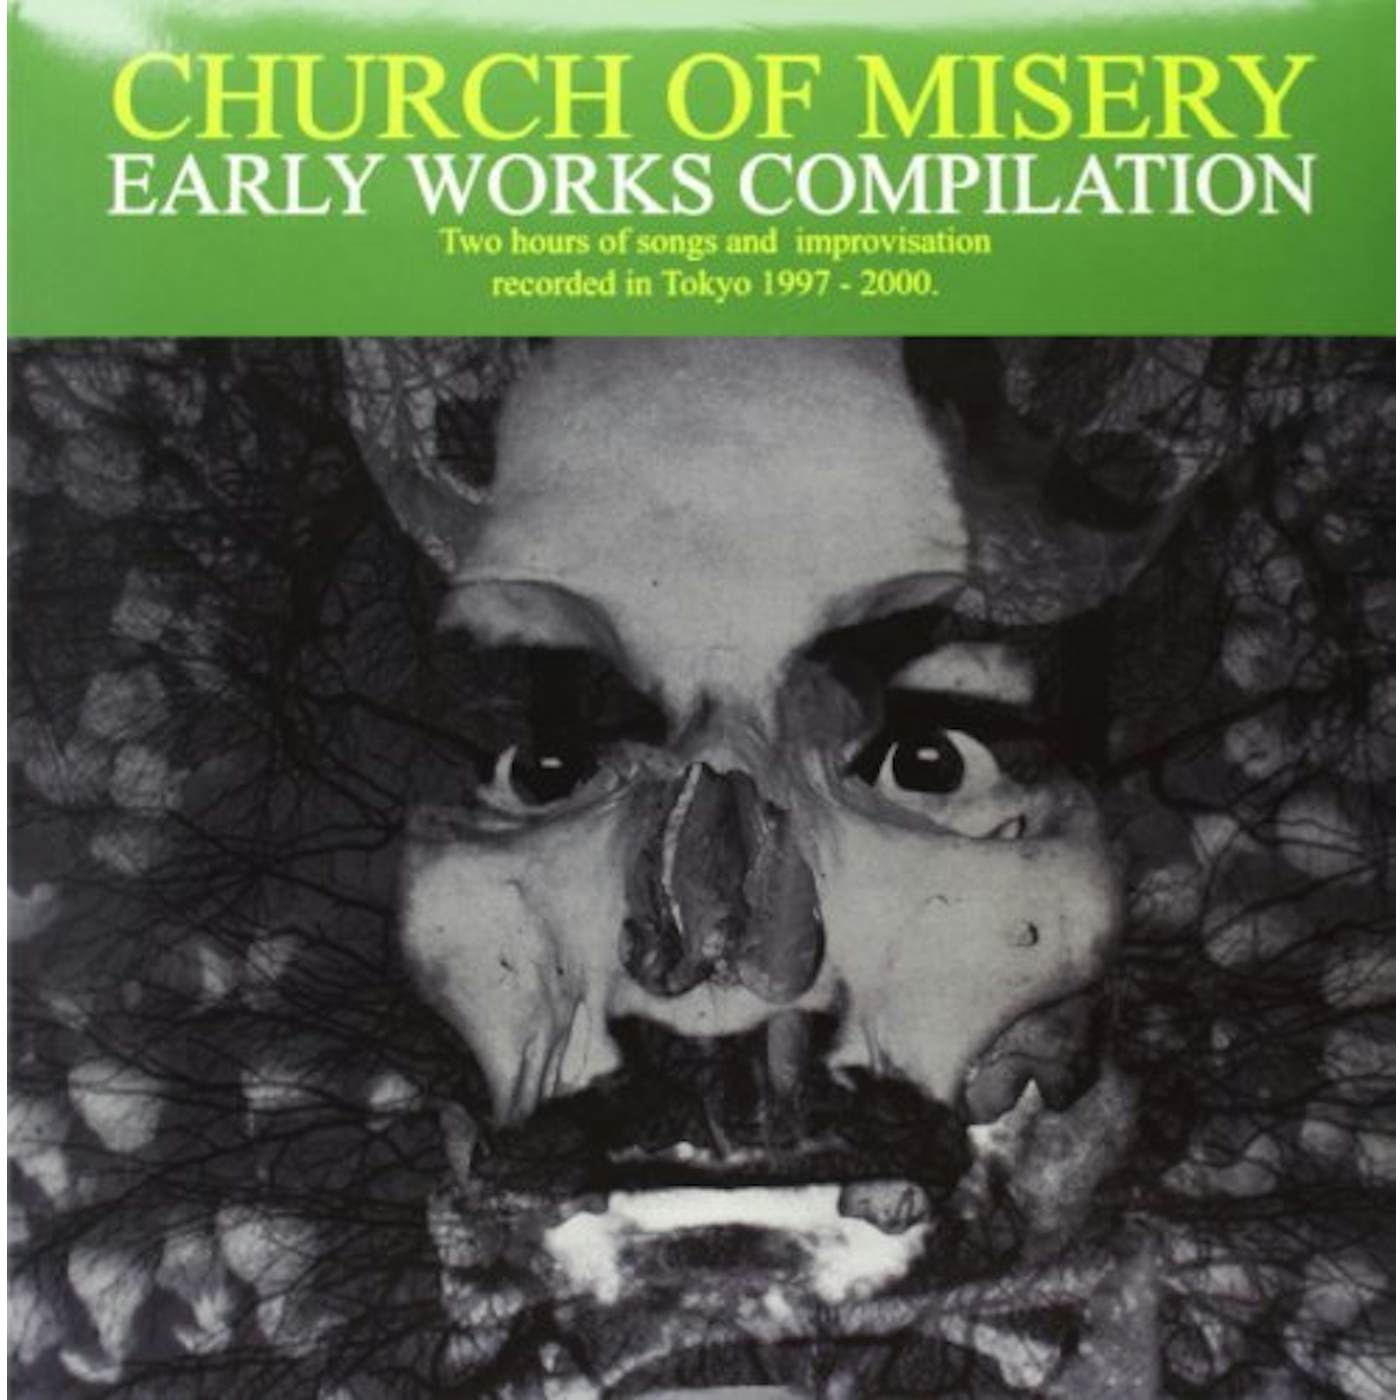 Church Of Misery Early Works Compilation Vinyl Record